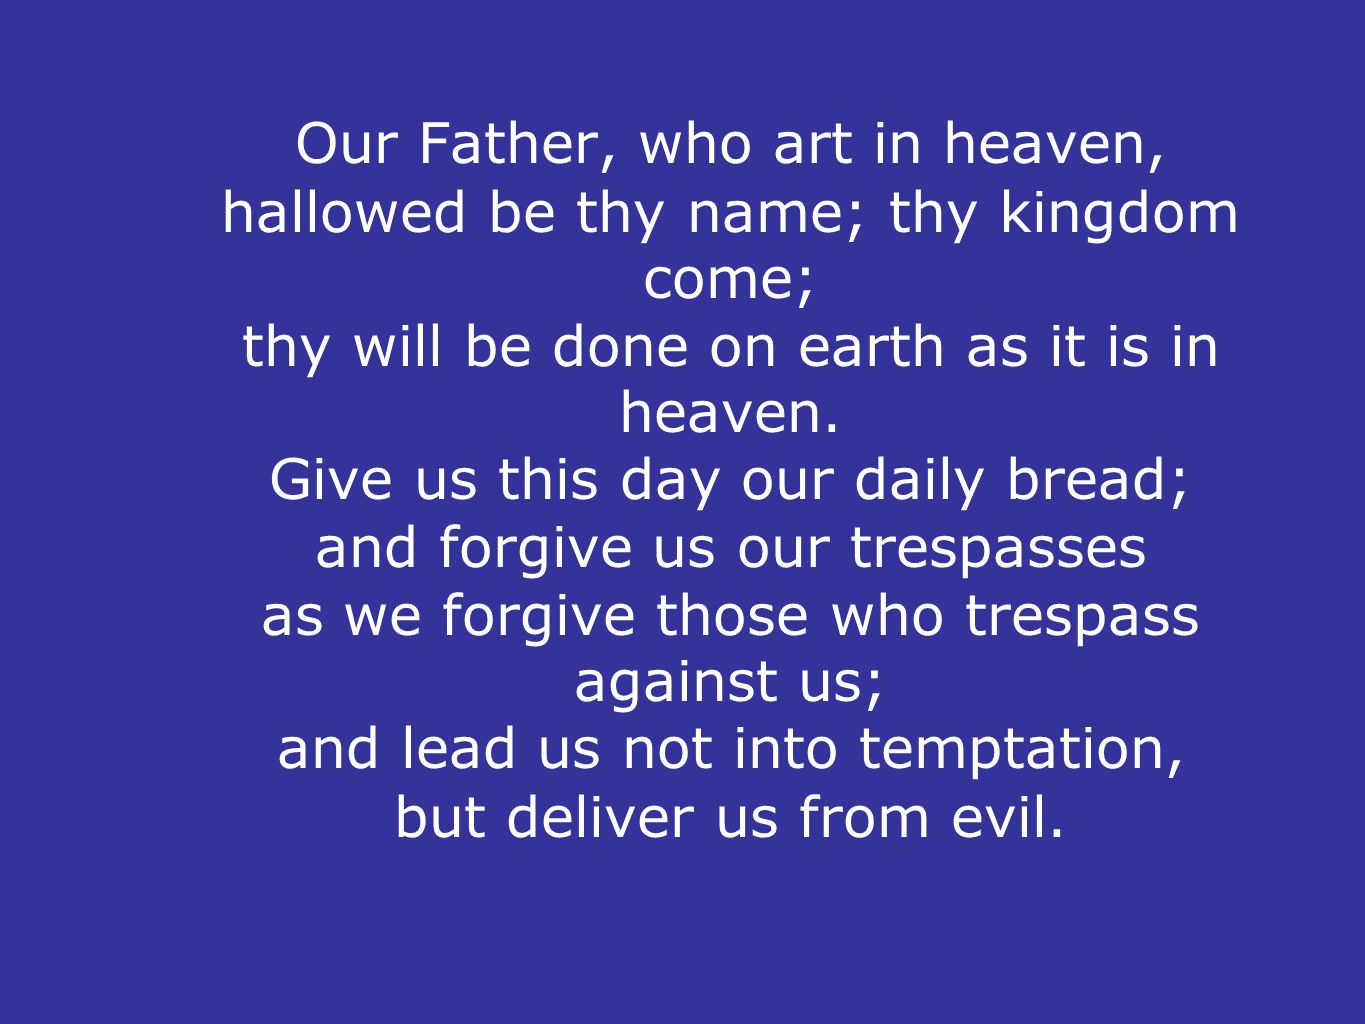 Our Father, who art in heaven, hallowed be thy name; thy kingdom come; thy will be done on earth as it is in heaven.